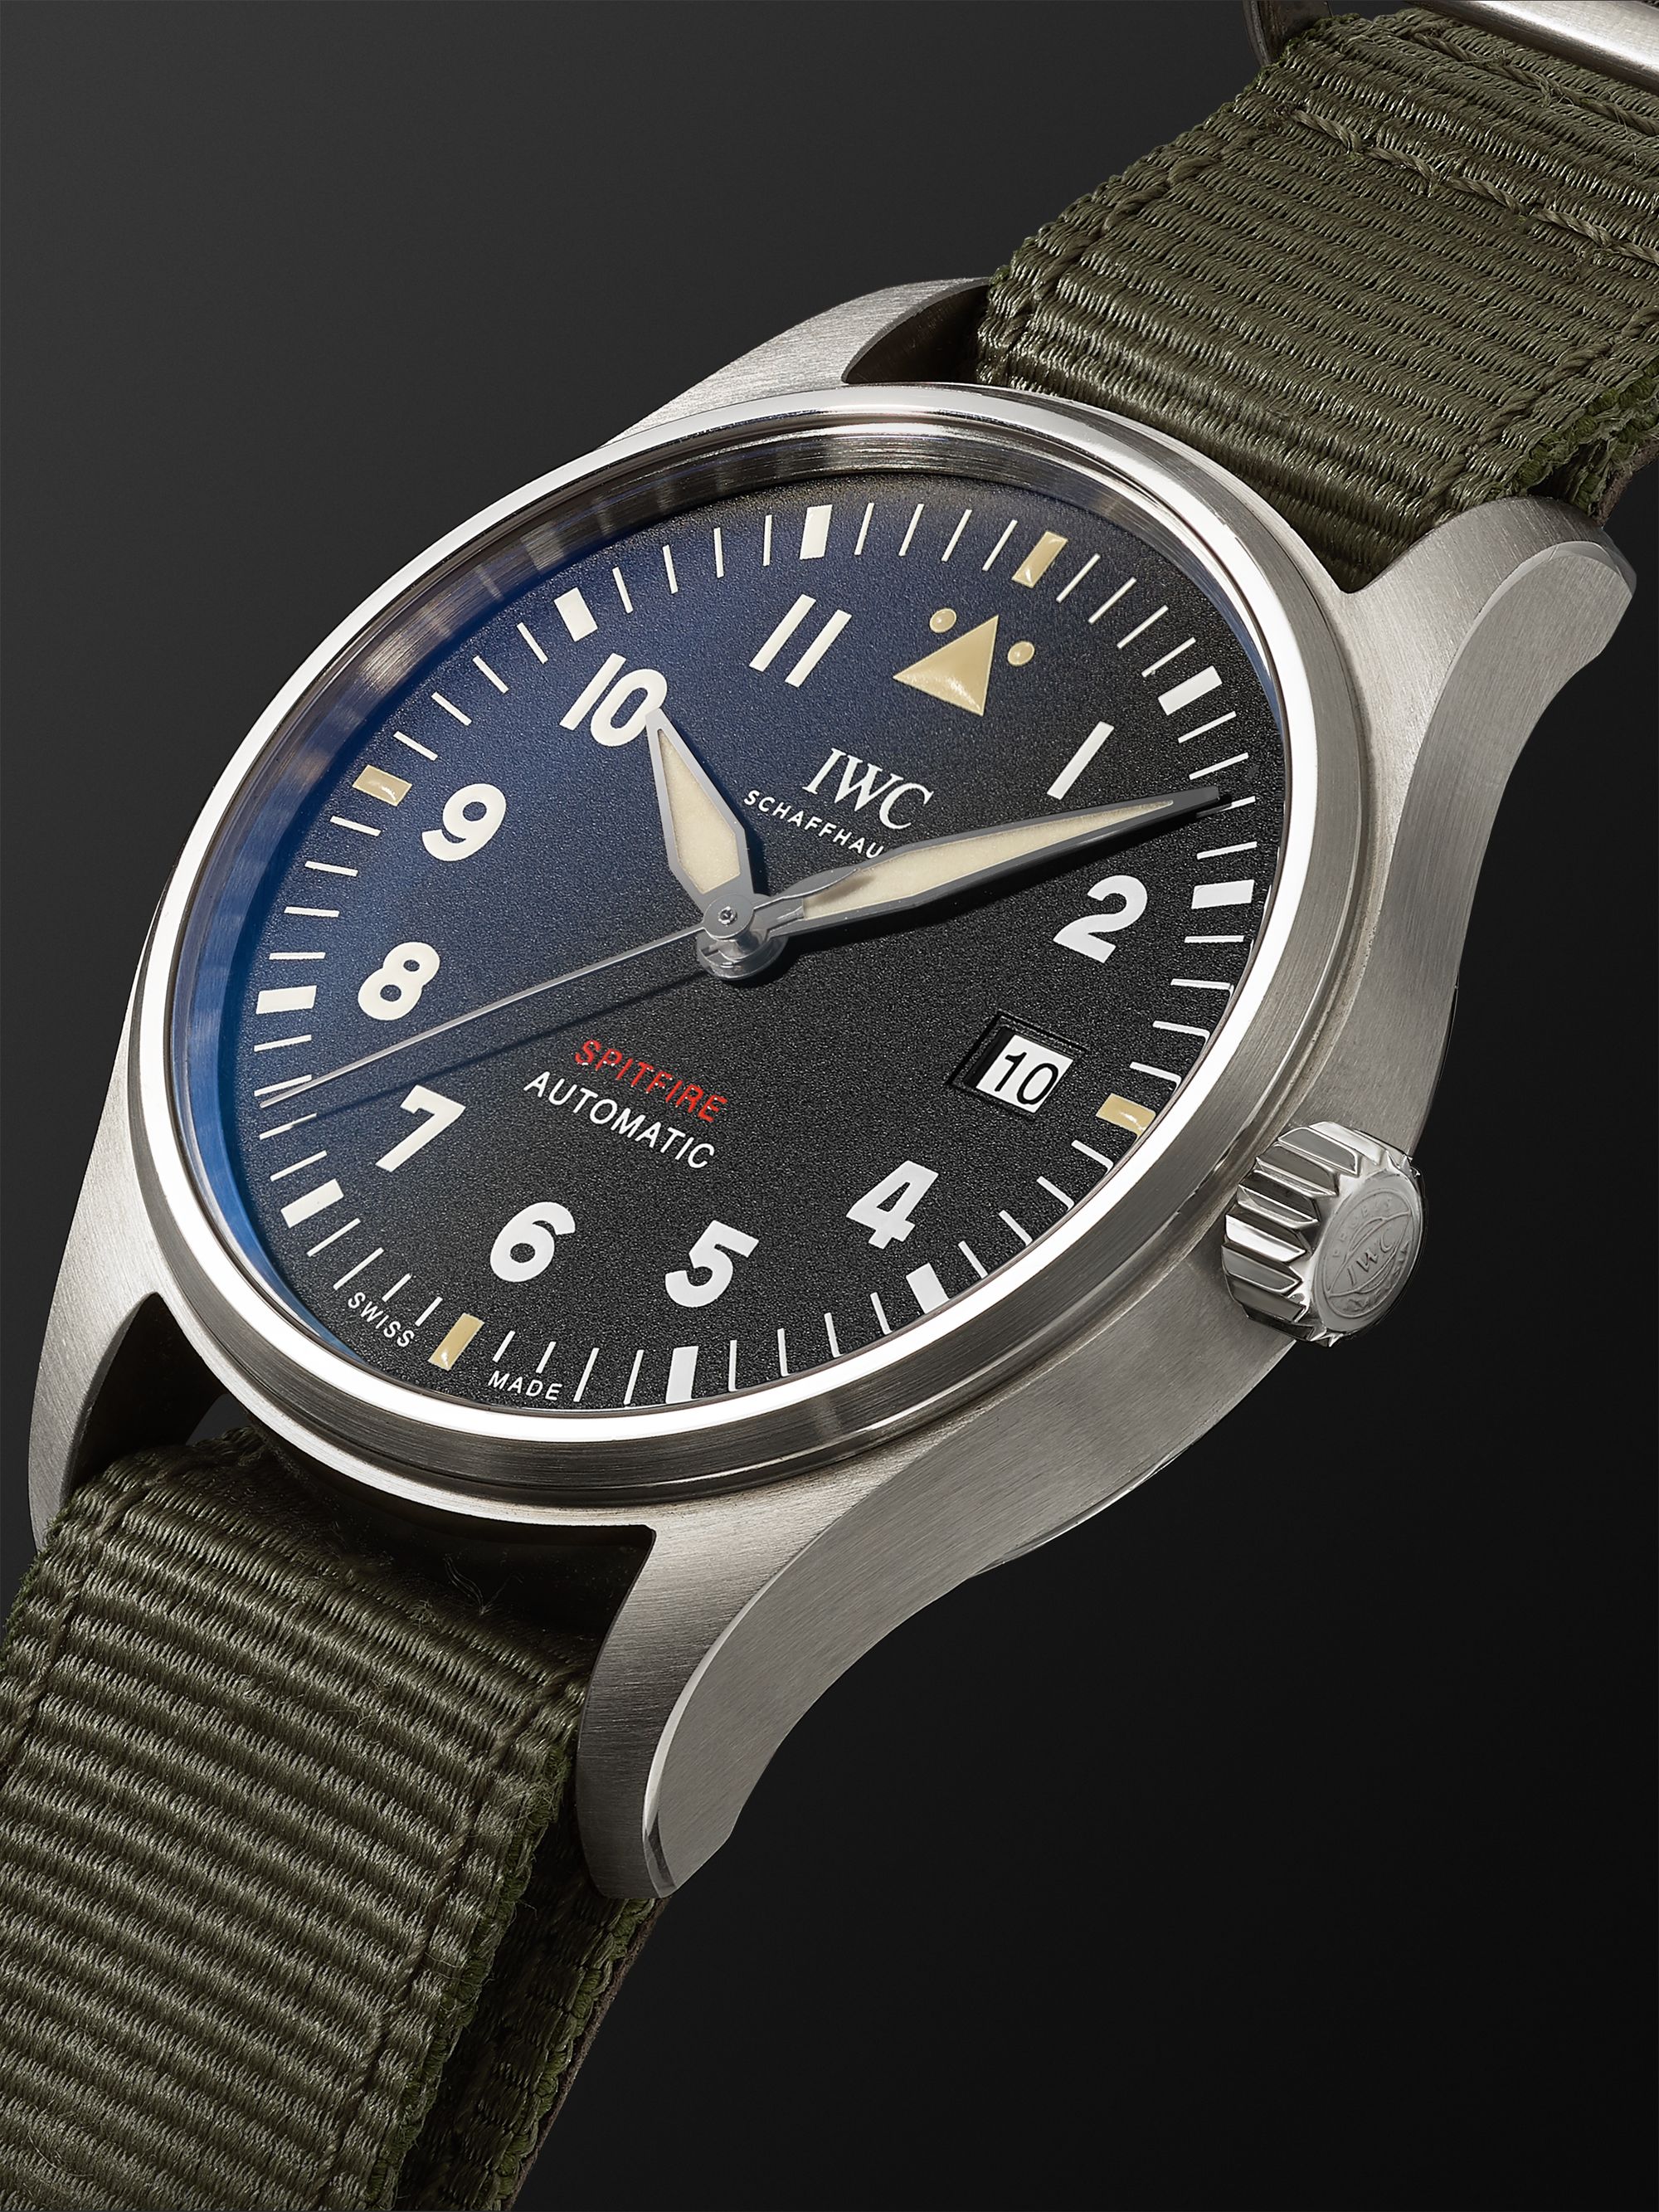 IWC SCHAFFHAUSEN Pilot's Spitfire Automatic 39mm Stainless Steel and Textile Watch, Ref. No. IW326801